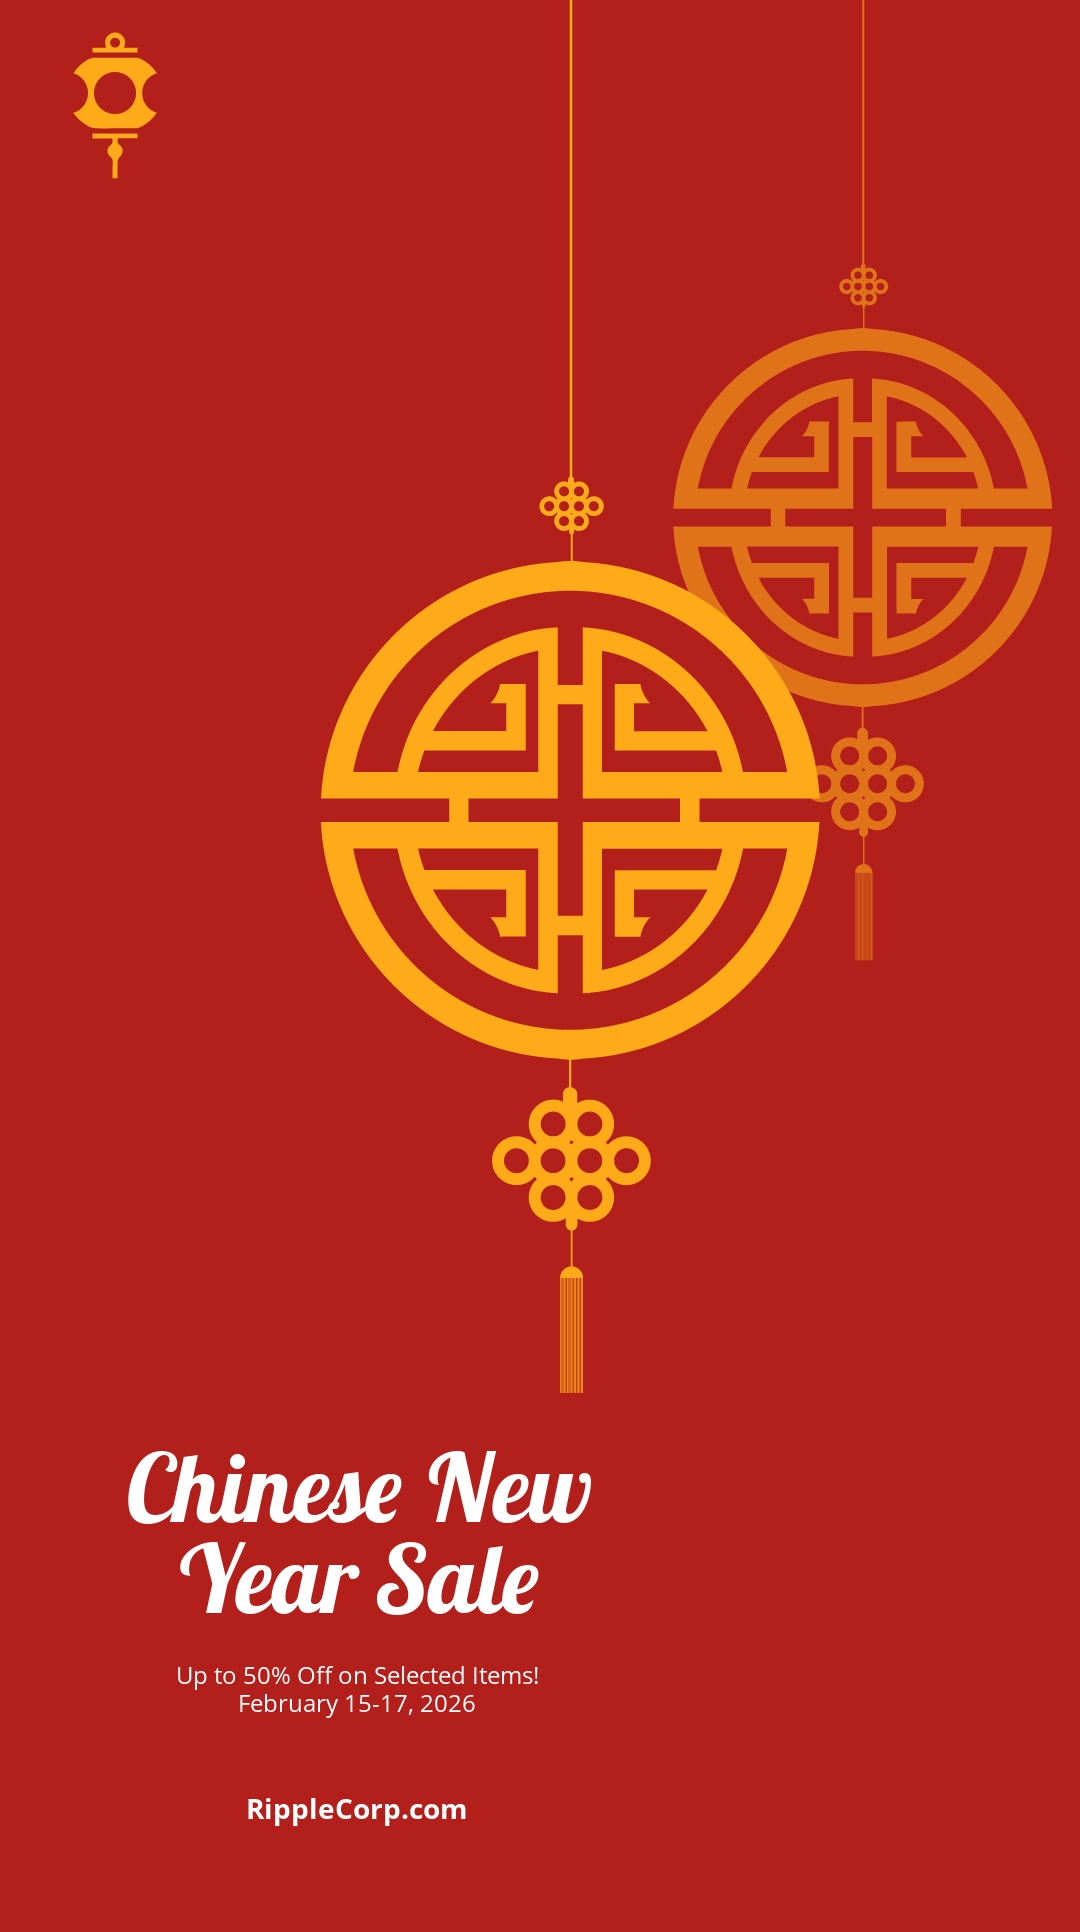 Chinese New Year Sale Snapchat Geofilter Template.jpe